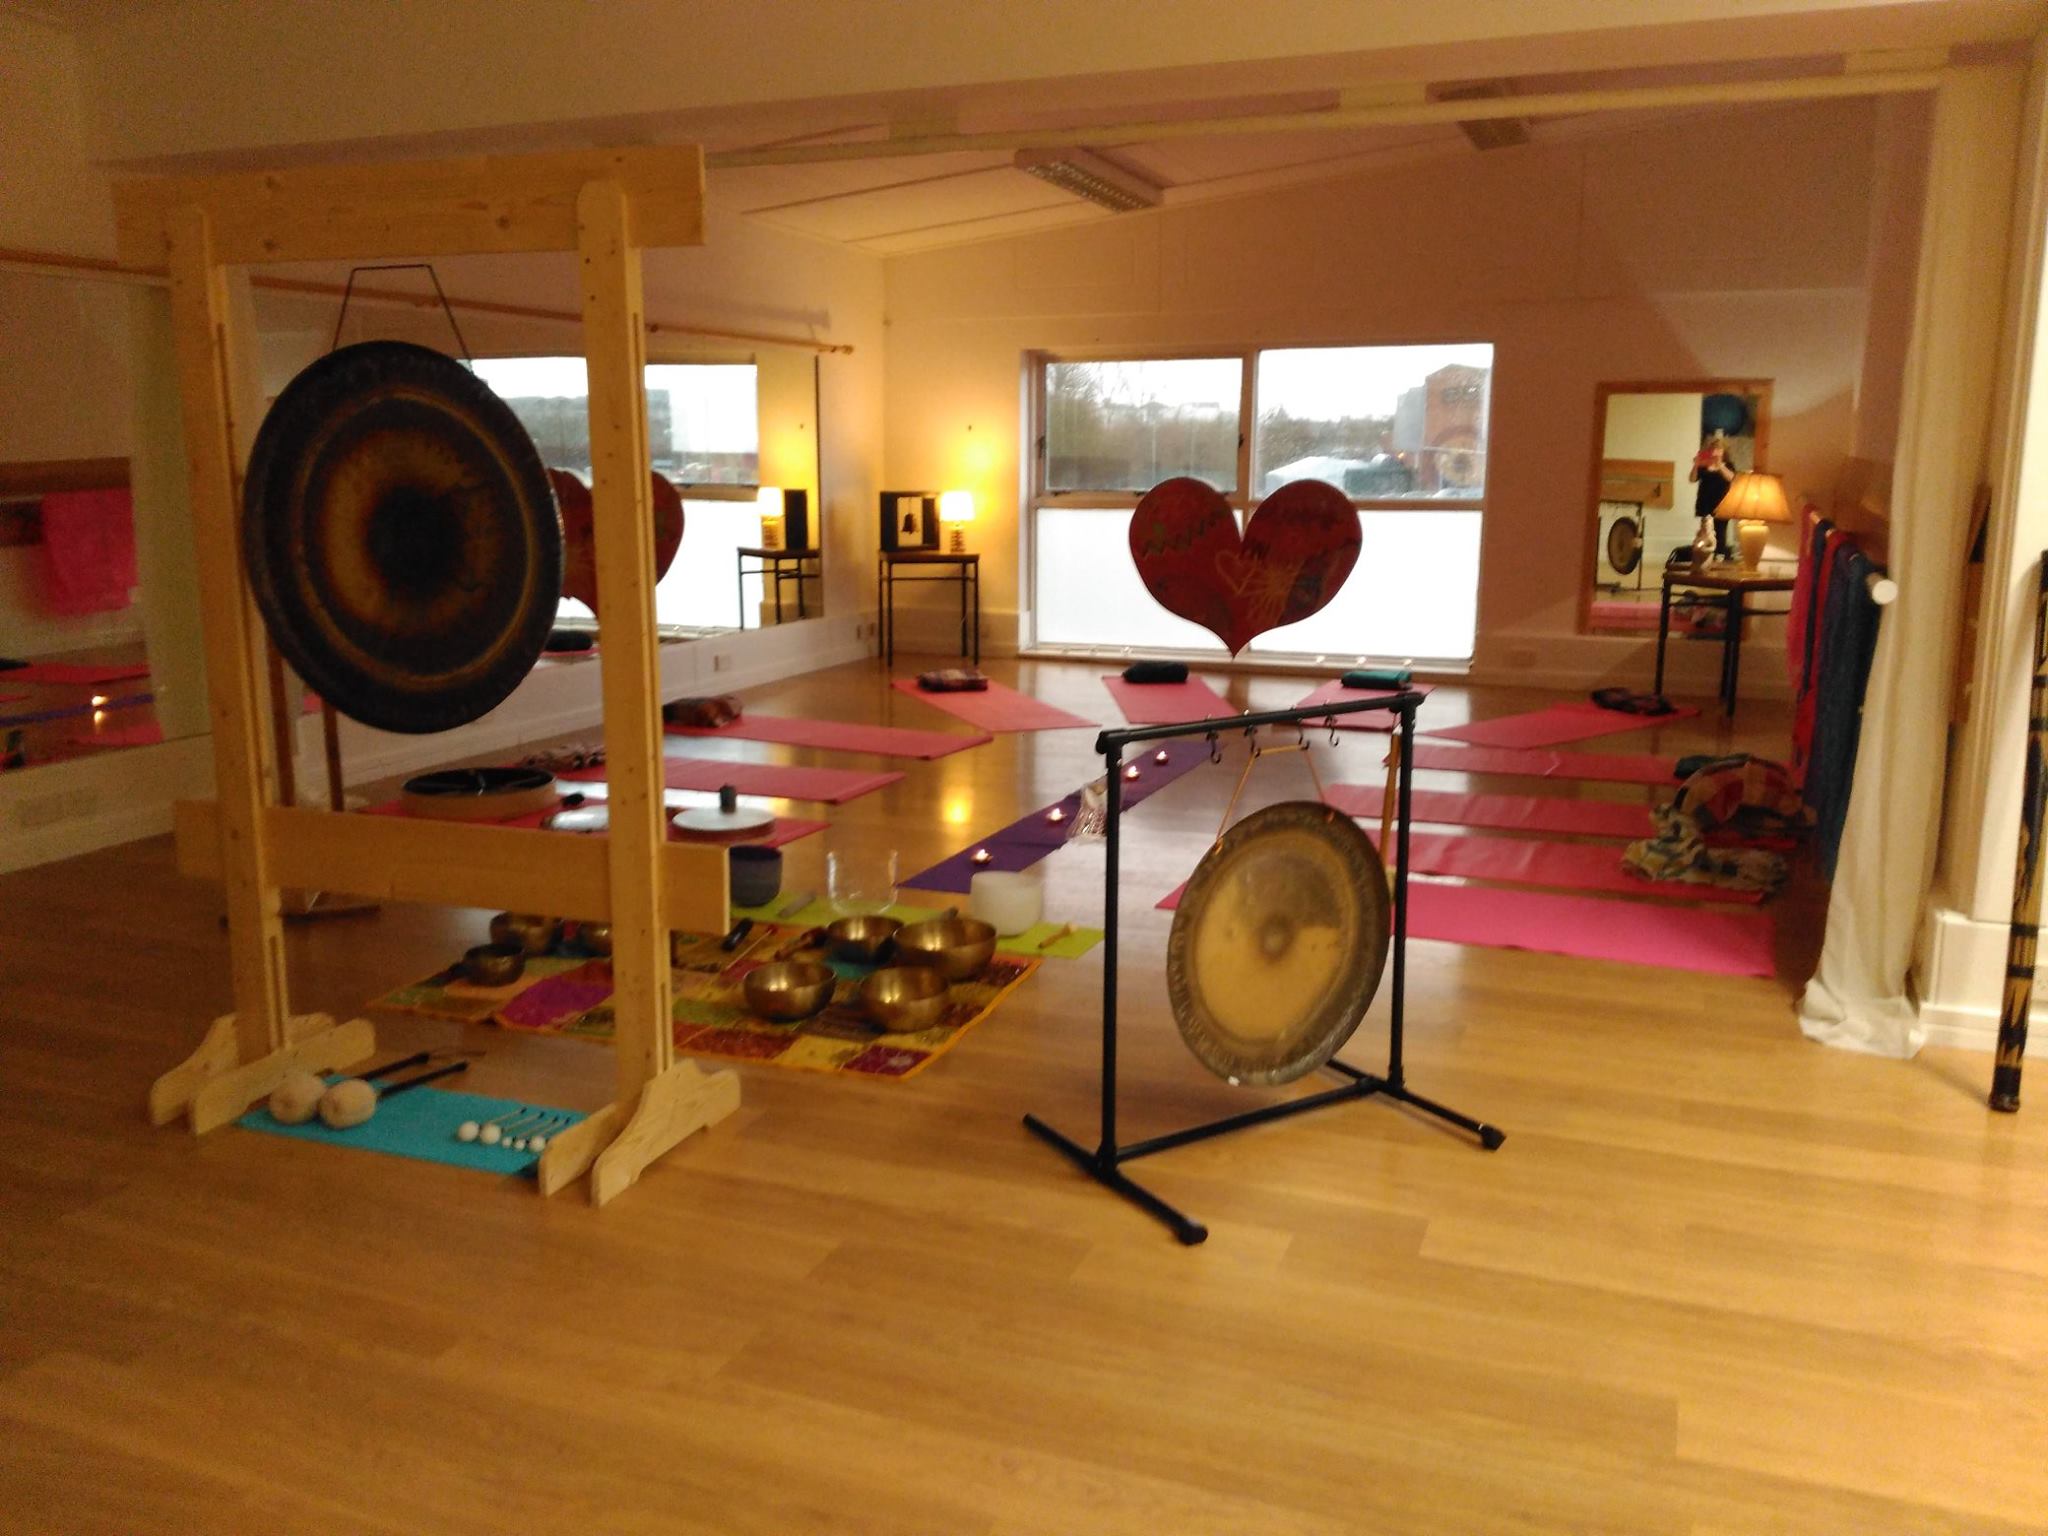 GALWAY - Sound Bath Healing Evenings with Norah Coyne in Galway